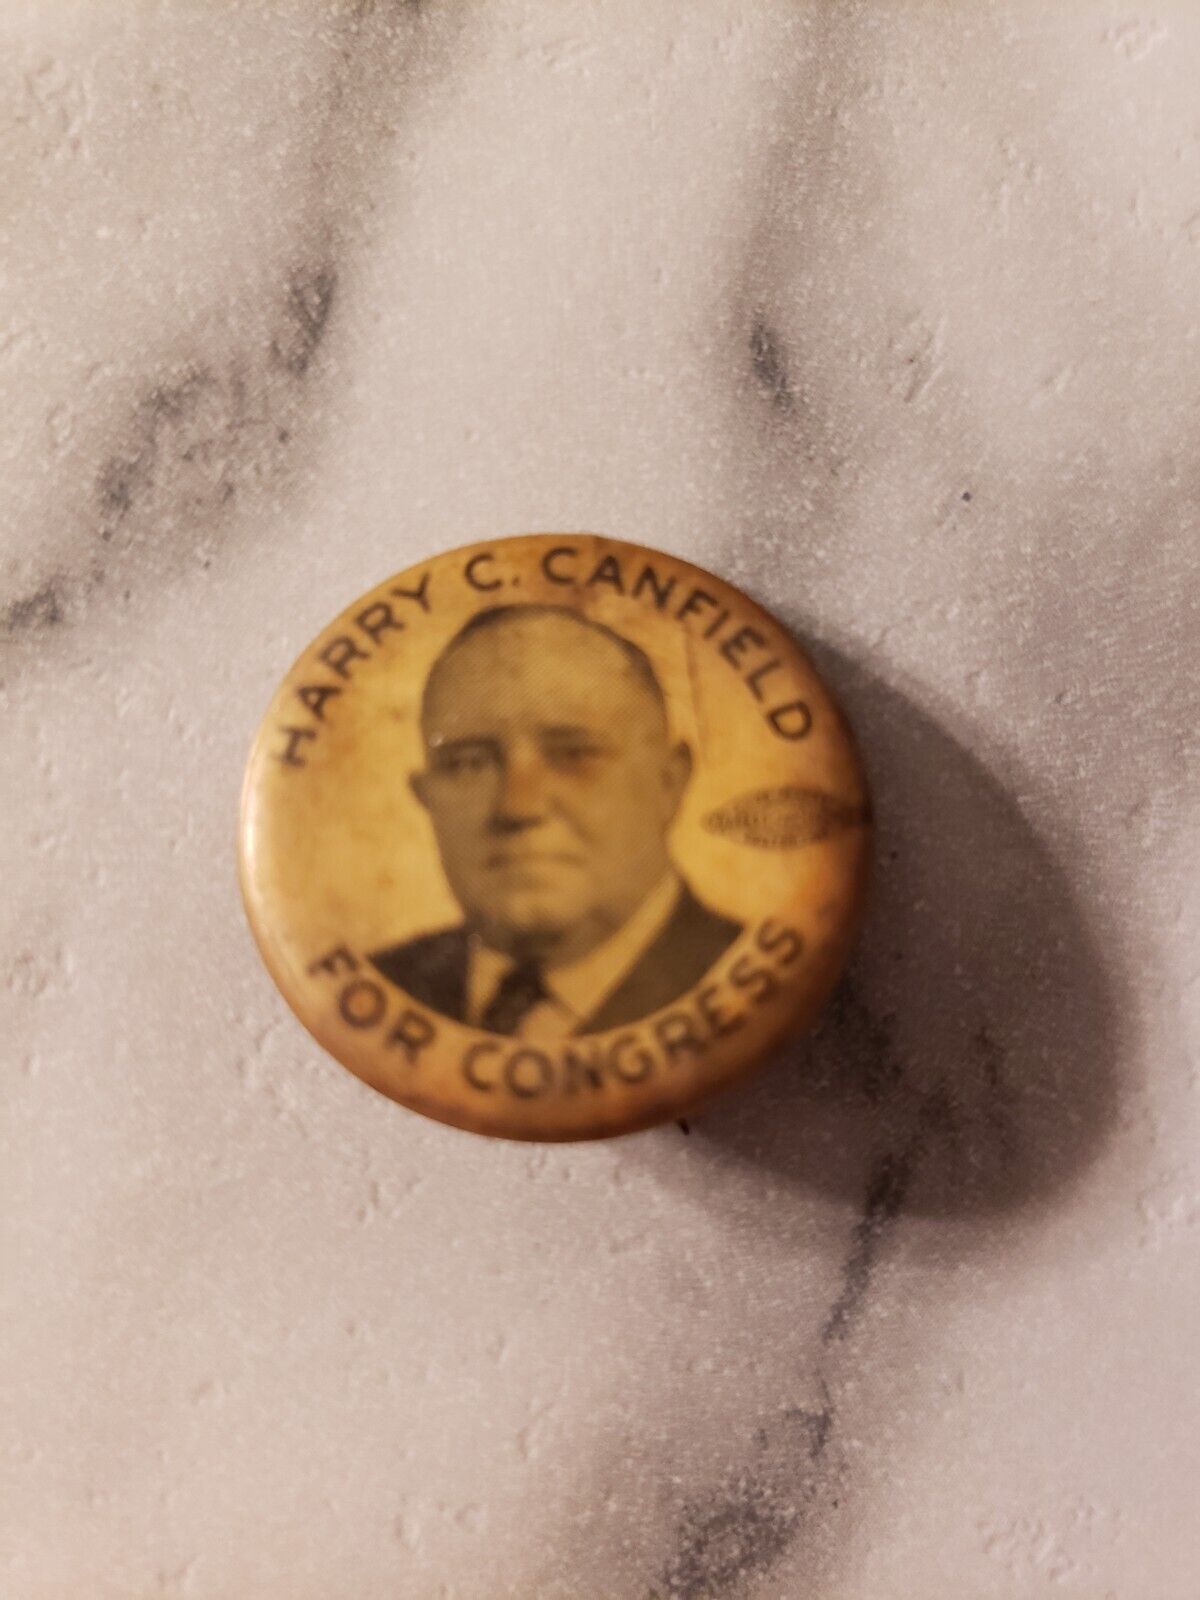 1930s Harry C. Canfield for Congress Button